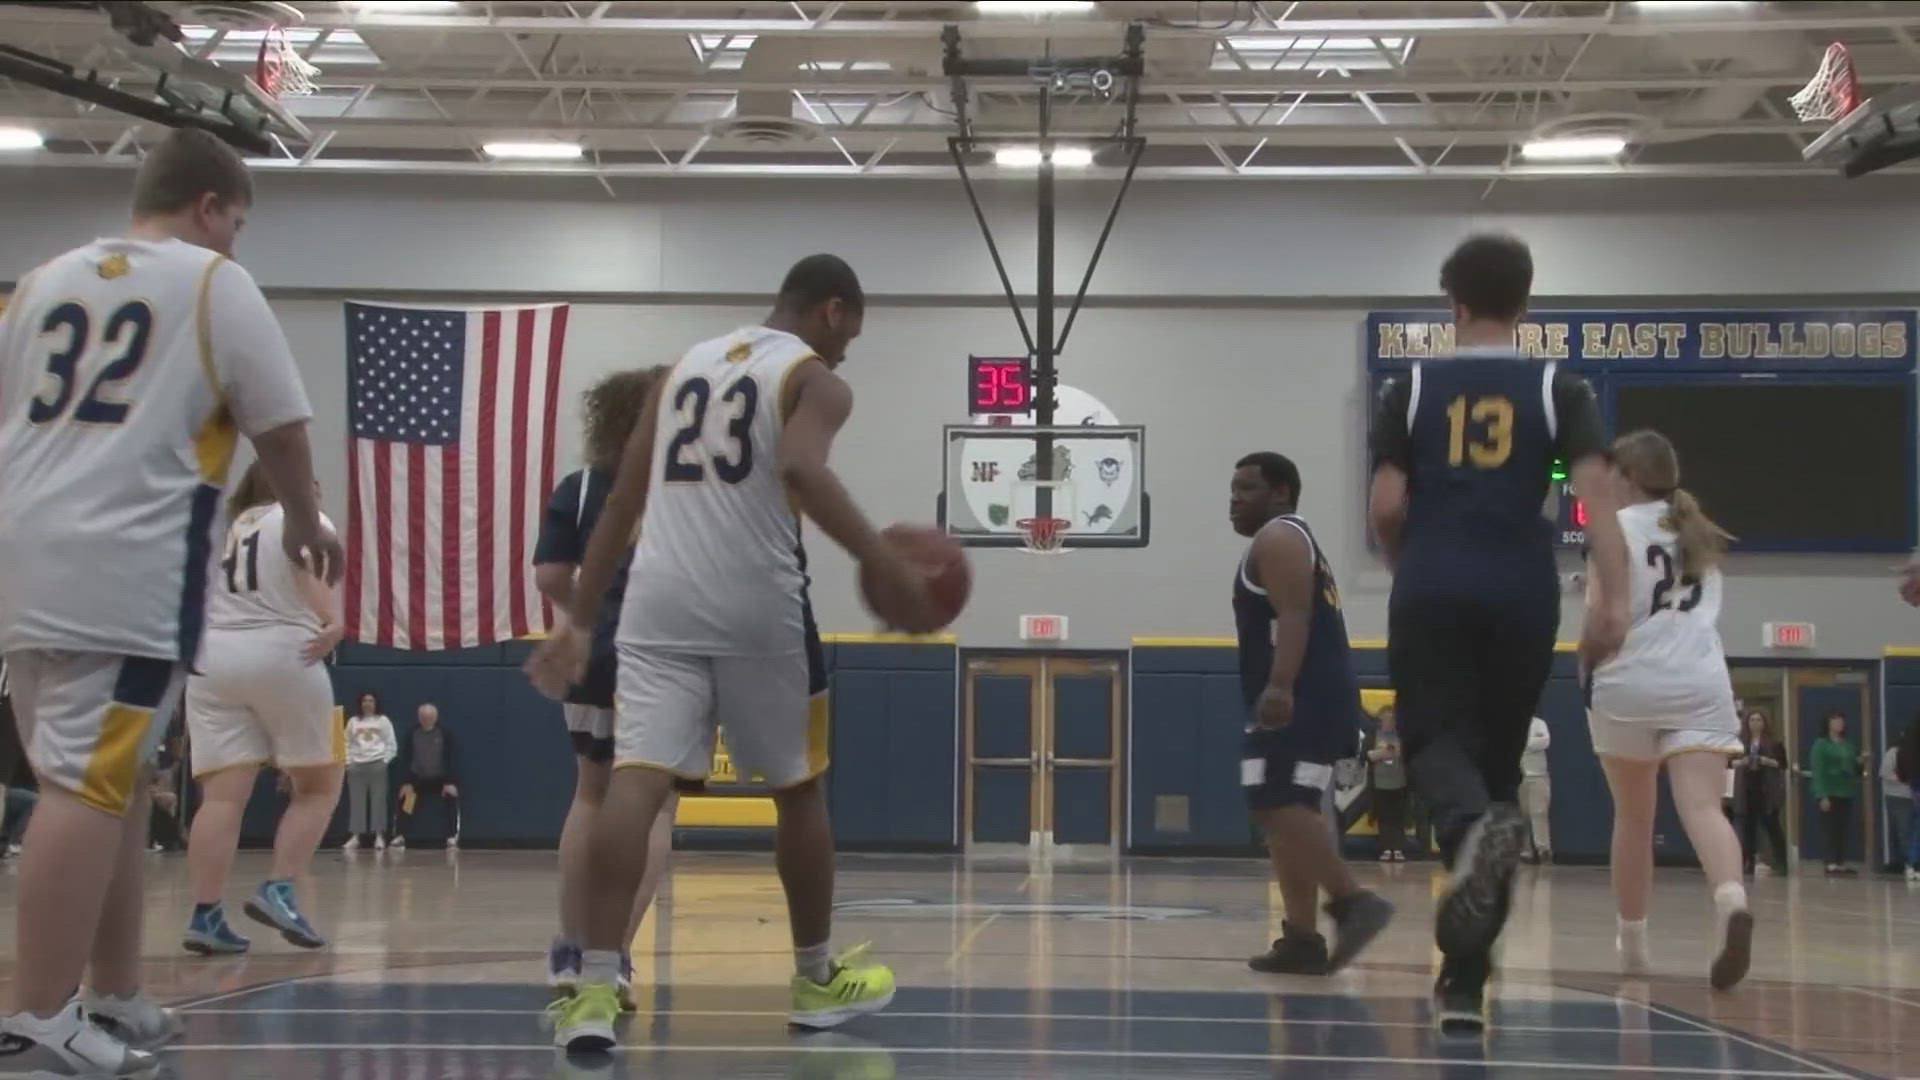 Students at Kenmore East High School were competing against one another in a Unified Basketball Game. That means everyone was invited to come out, boys and girls.